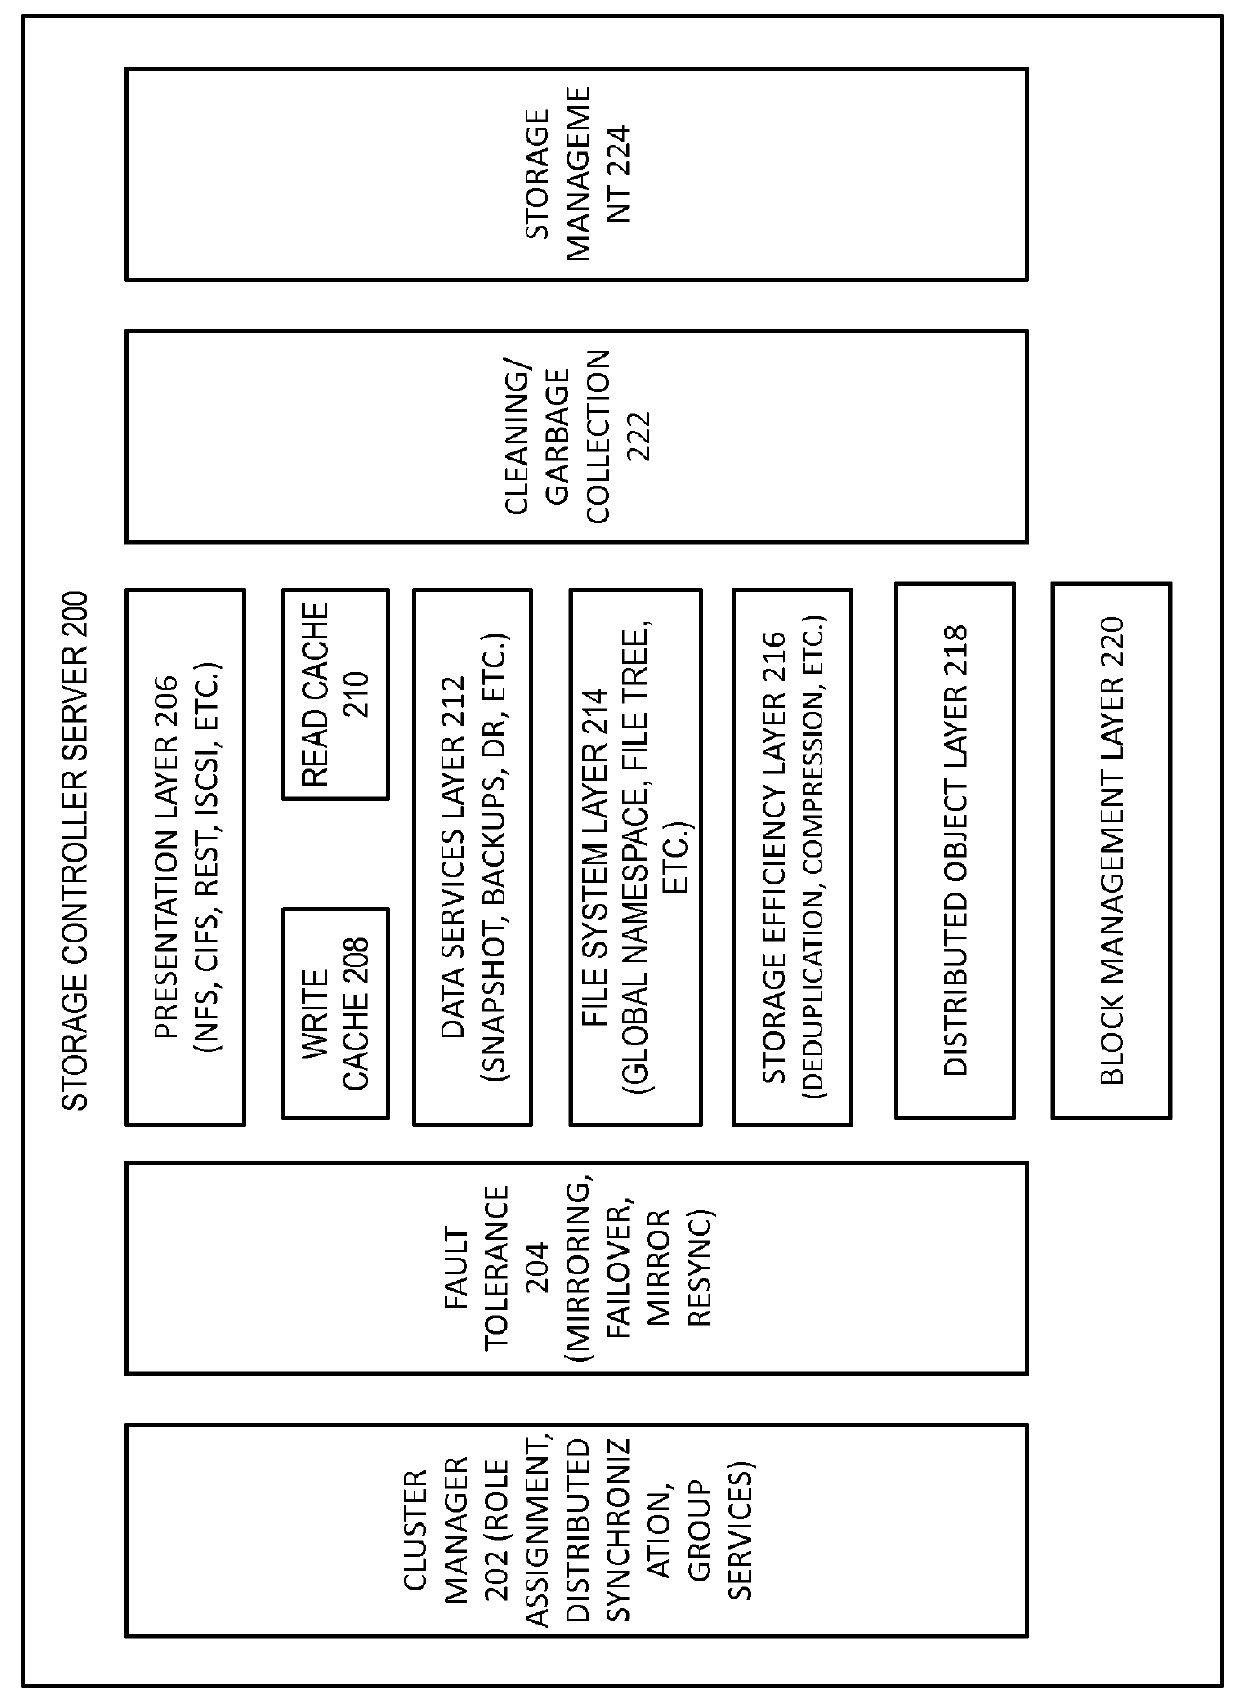 Automated load balancing across the distributed system of hybrid storage and compute nodes